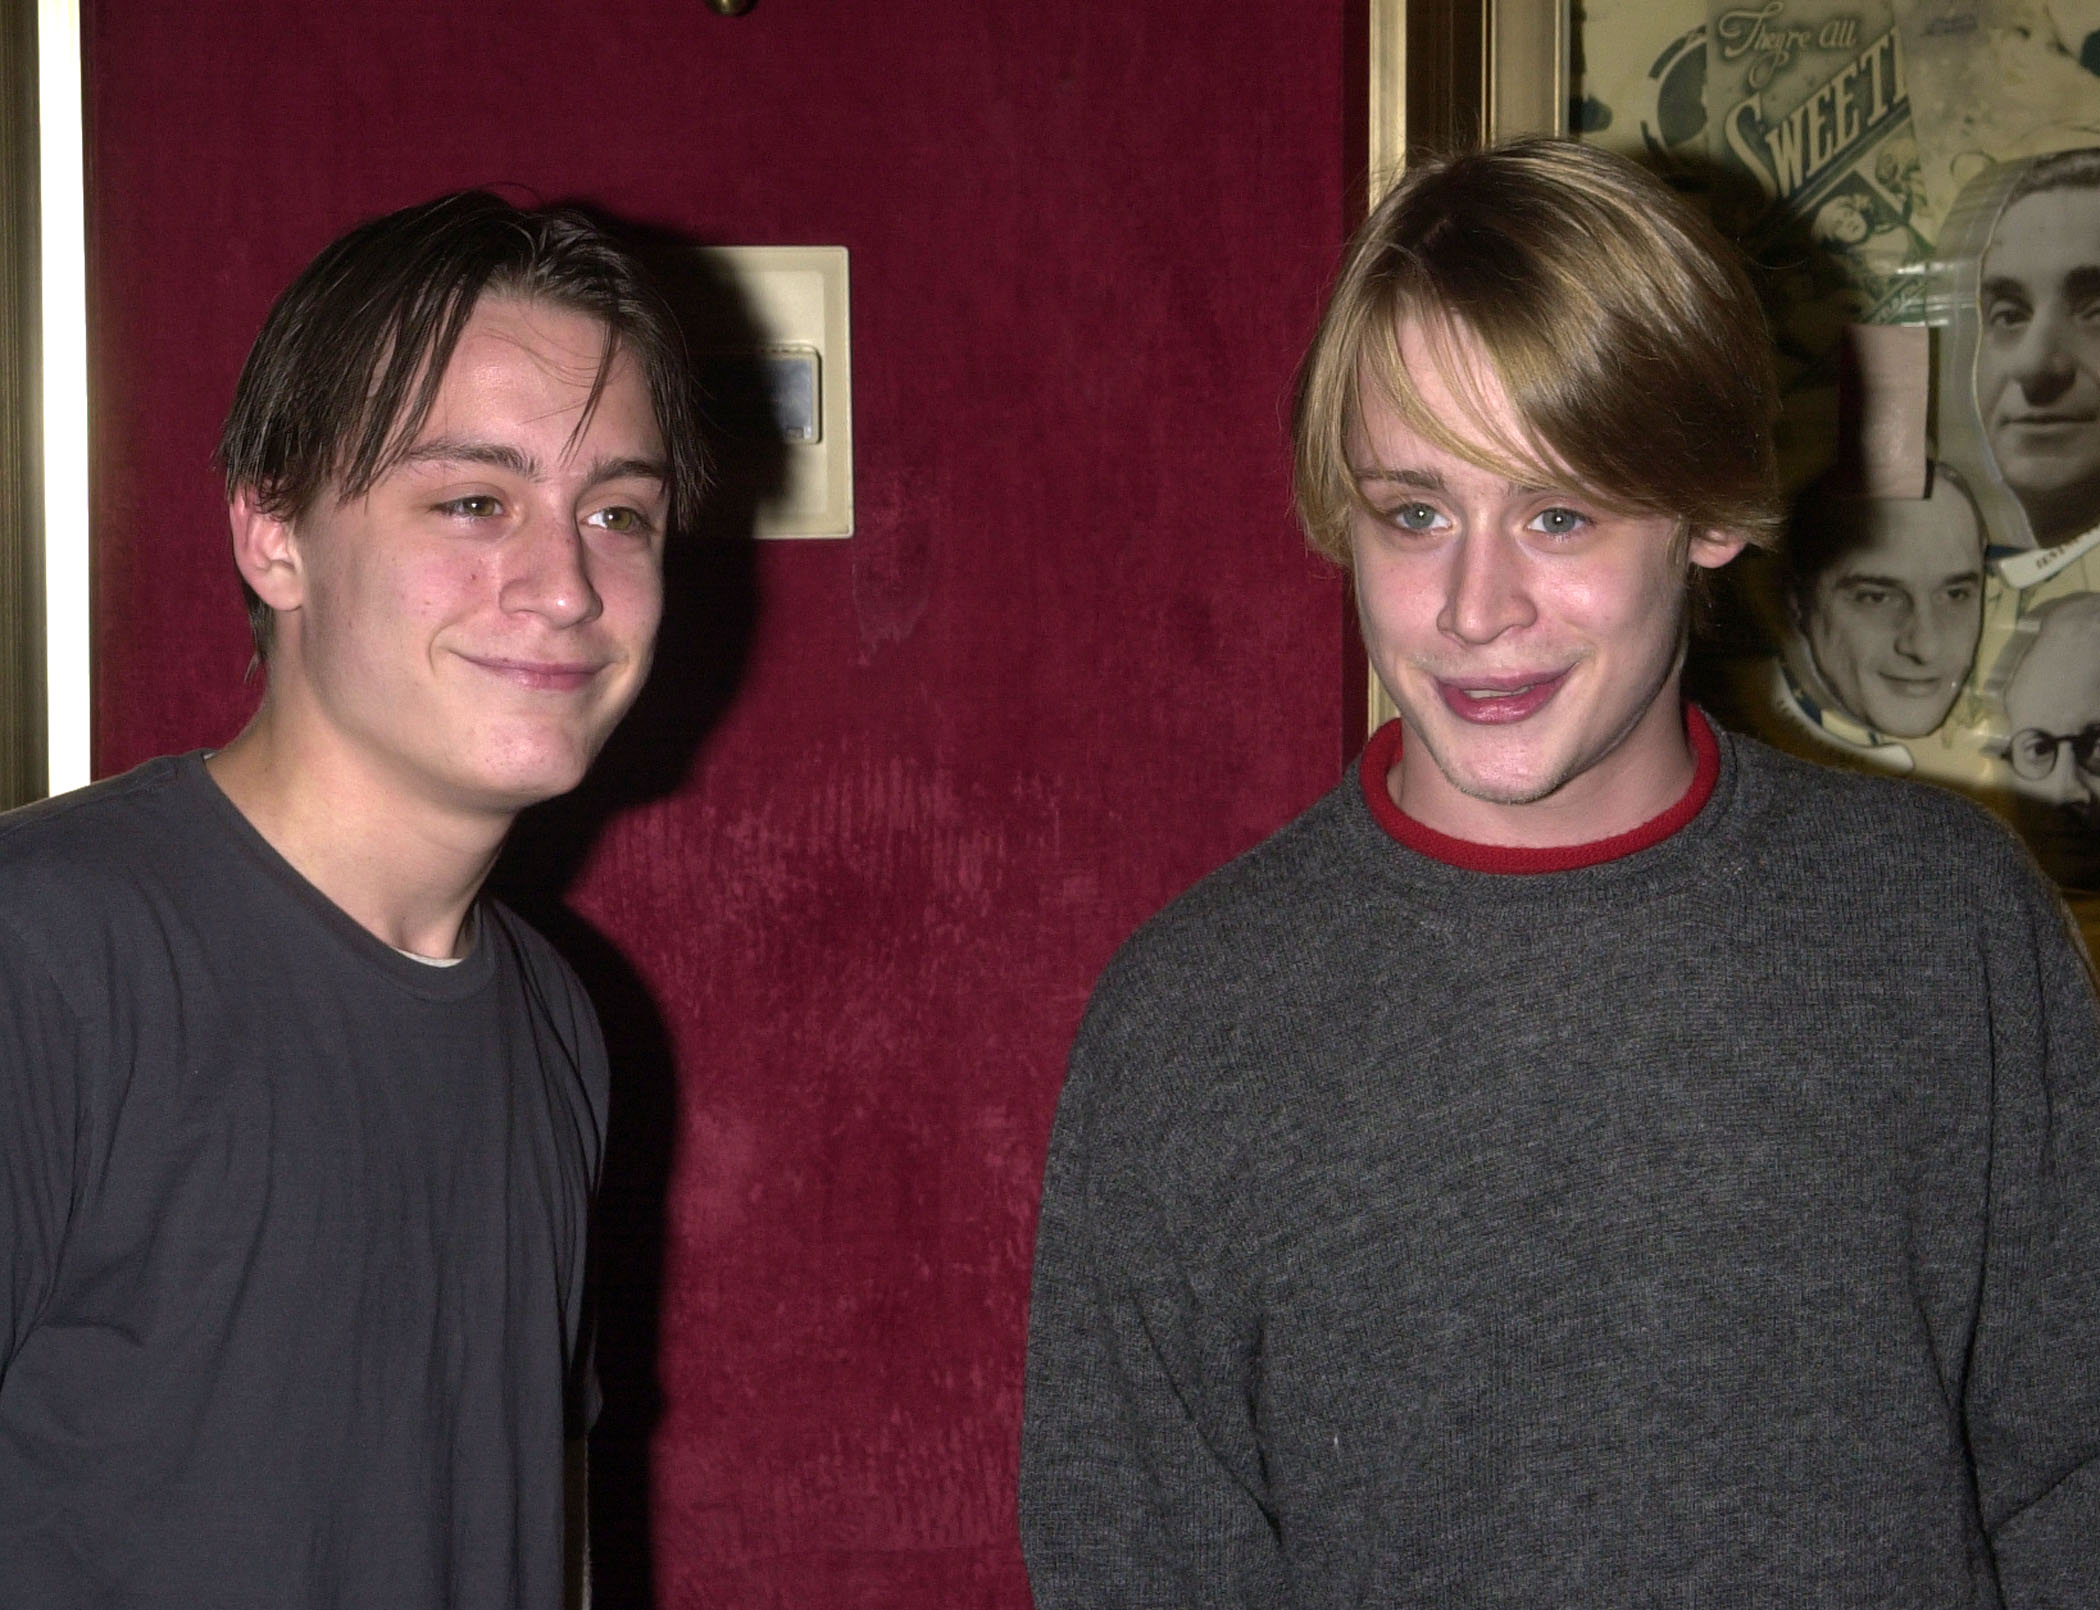 Kieran and Macaulay Culkin attend the premiere of "Serendipity" in New York City on October 3, 2001 | Source: Getty Images